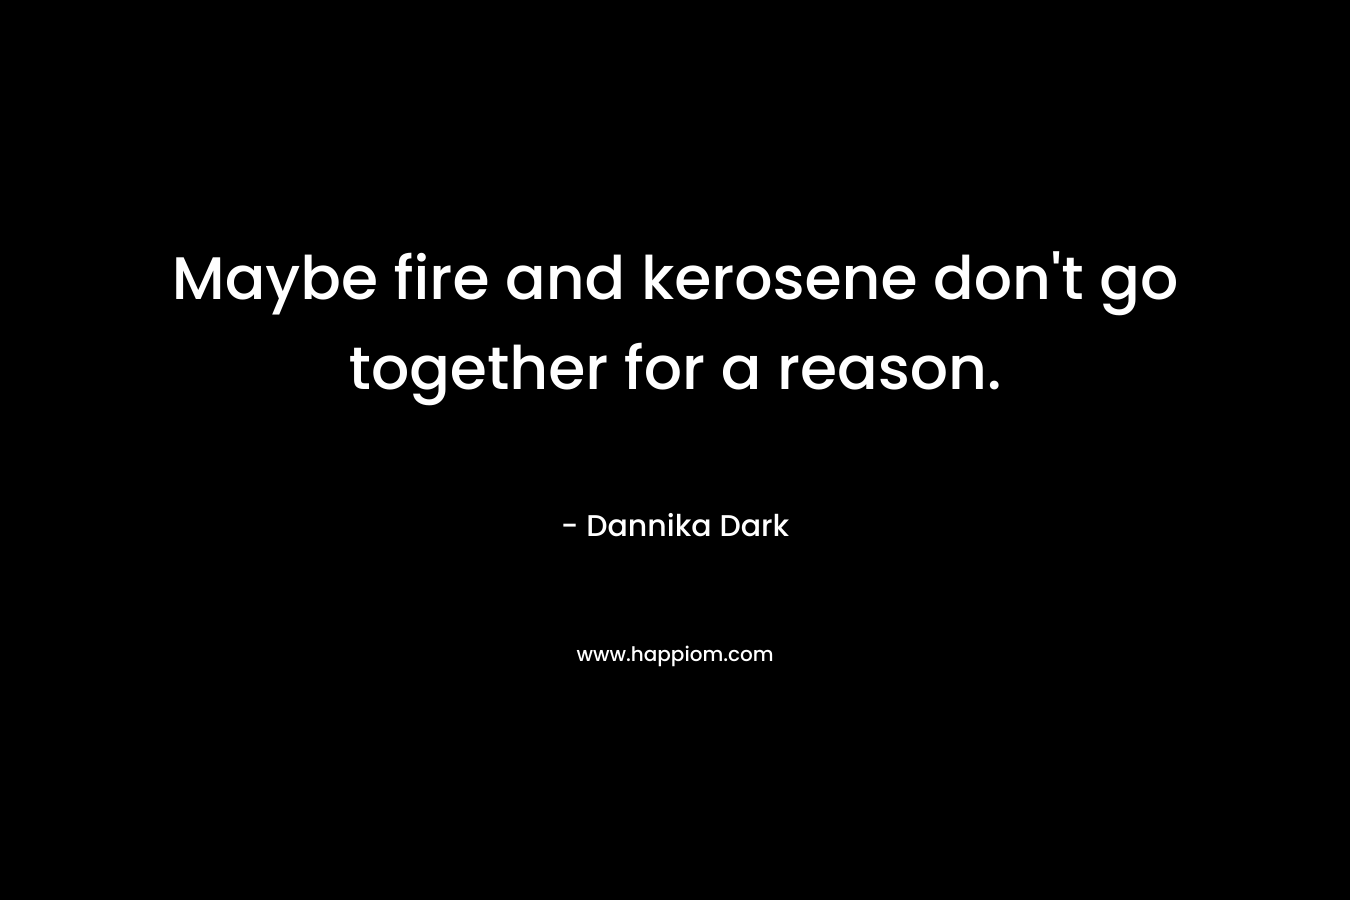 Maybe fire and kerosene don't go together for a reason.